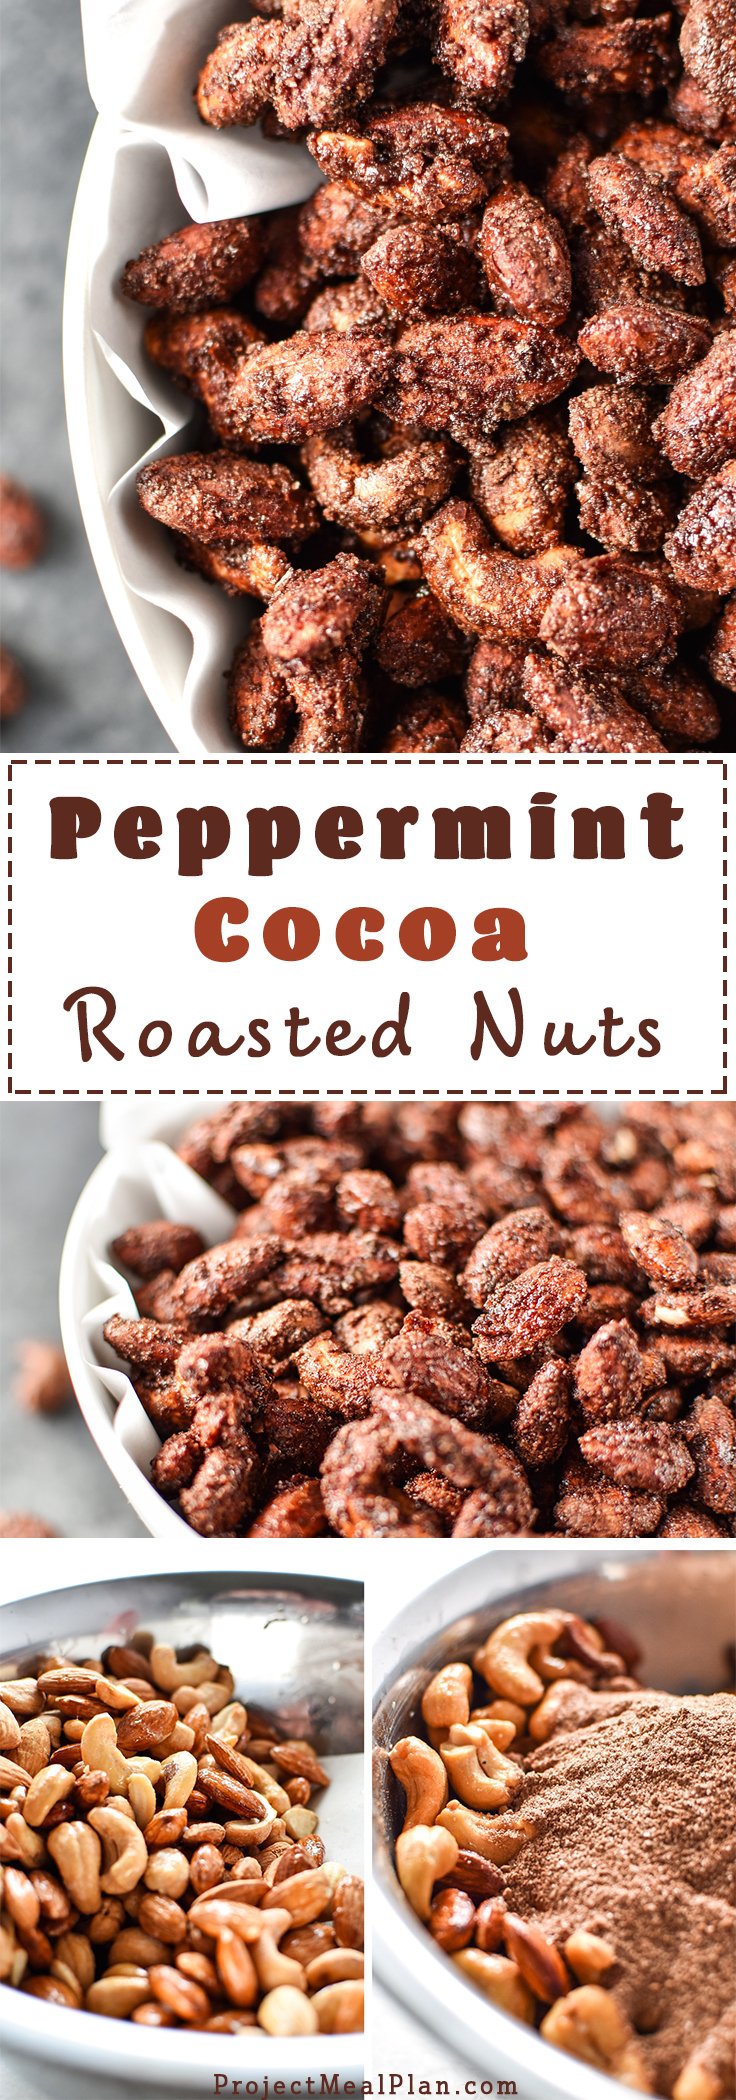 Peppermint Cocoa Roasted Nuts - Perfectly coated with chocolate and a hint of peppermint, best for holiday parties! #holidayfood #spicednuts #roastednuts